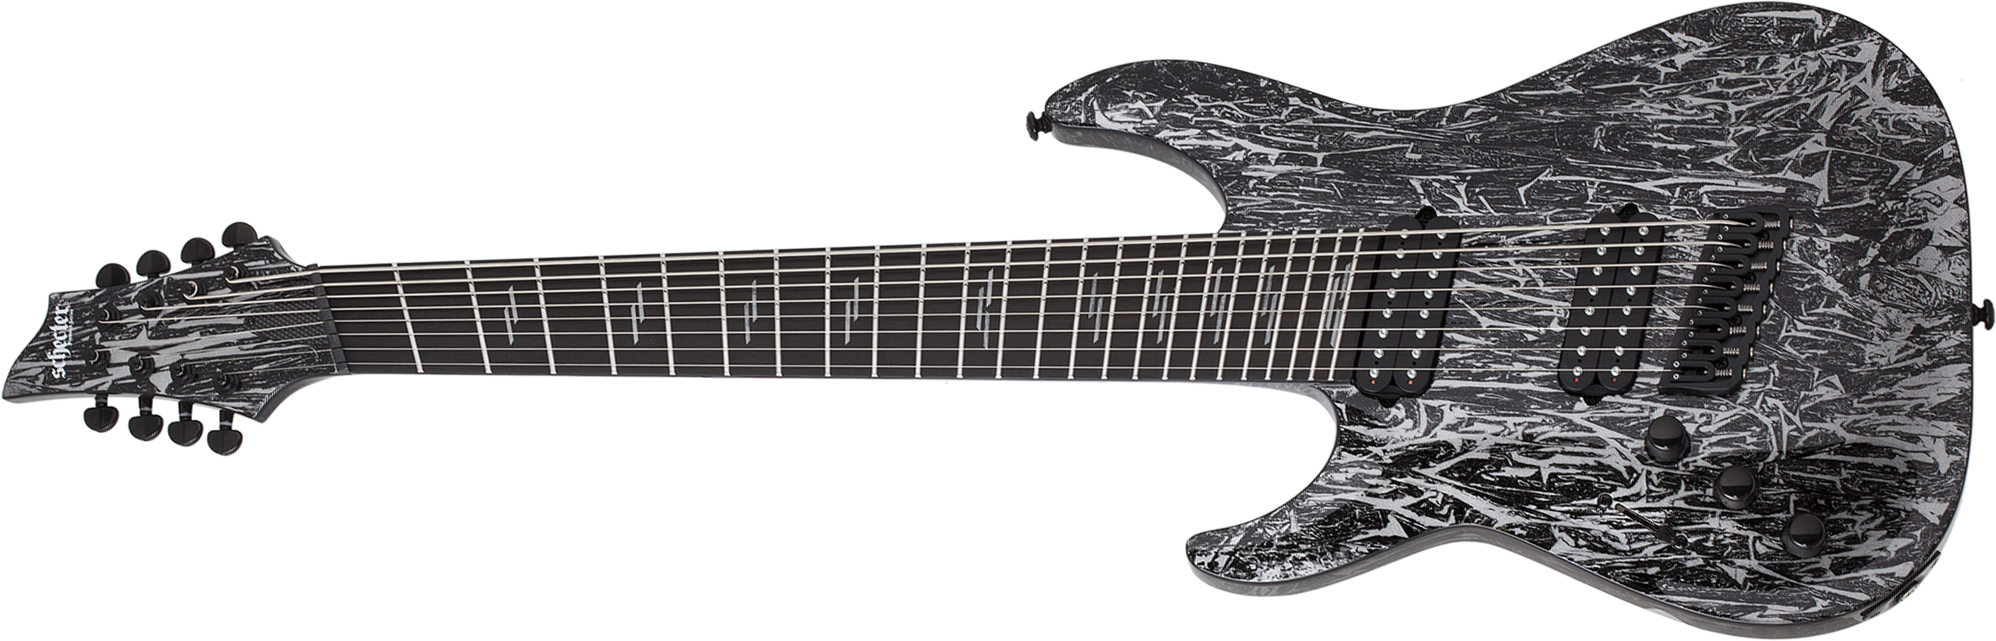 Schecter C-8 Multiscale Lh 8c Gaucher Baryton 2h Ht Eb - Silver Mountain - Left-handed electric guitar - Main picture